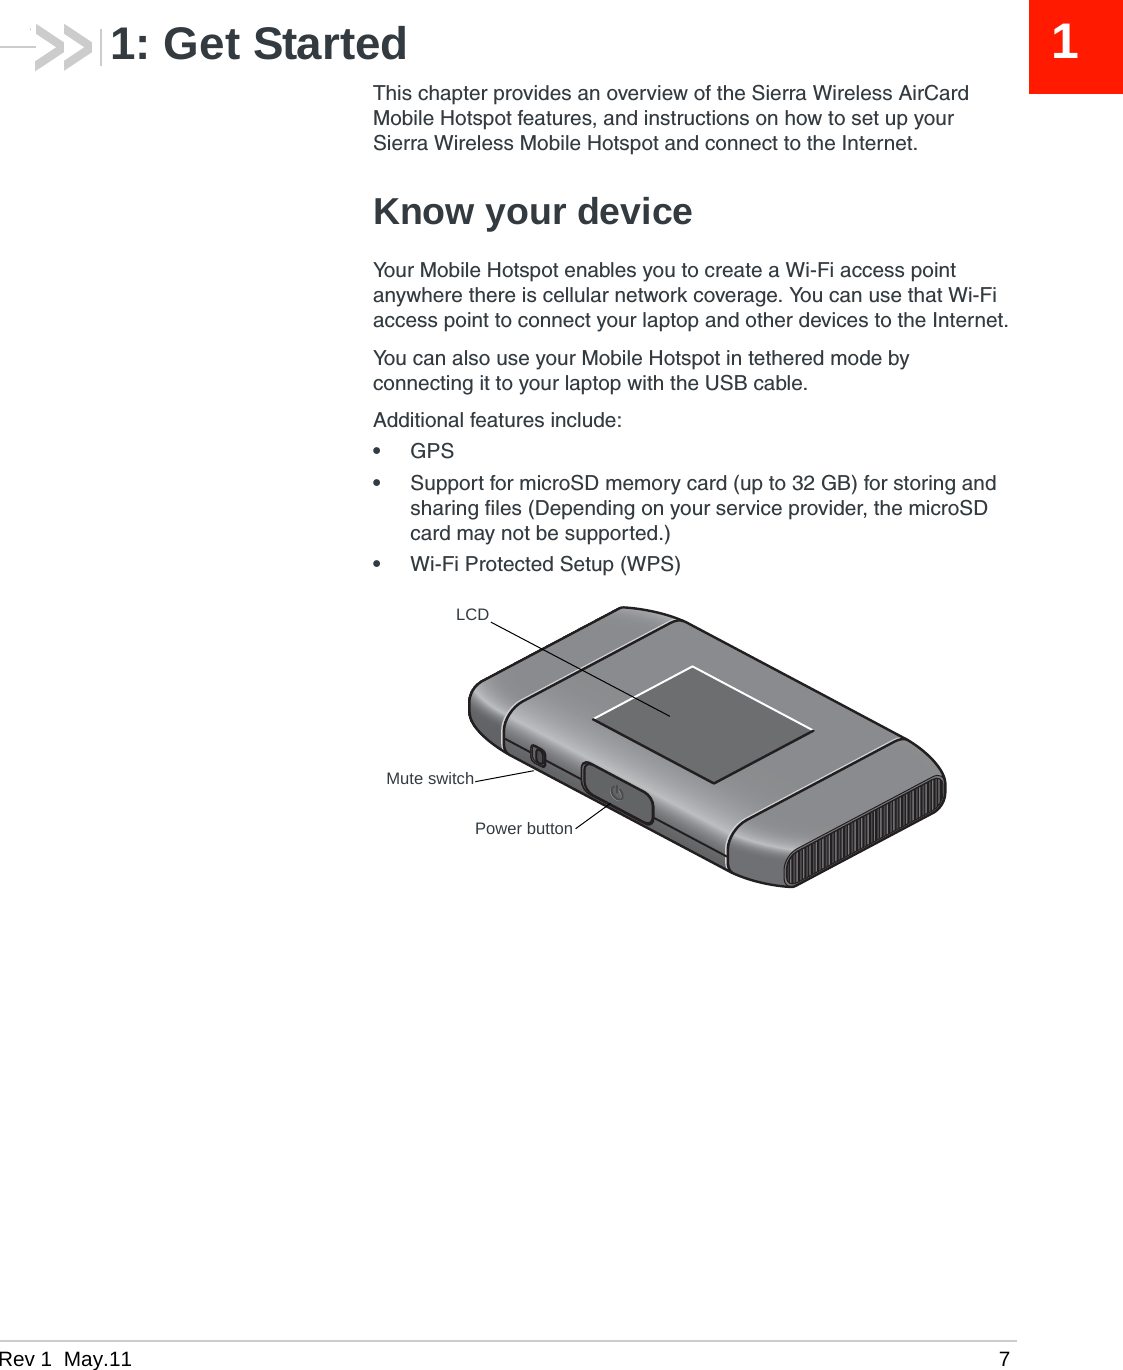 Rev 1  May.11 711: Get StartedThis chapter provides an overview of the Sierra Wireless AirCard Mobile Hotspot features, and instructions on how to set up your Sierra Wireless Mobile Hotspot and connect to the Internet. Know your deviceYour Mobile Hotspot enables you to create a Wi-Fi access point anywhere there is cellular network coverage. You can use that Wi-Fi access point to connect your laptop and other devices to the Internet.You can also use your Mobile Hotspot in tethered mode by connecting it to your laptop with the USB cable.Additional features include:•GPS•Support for microSD memory card (up to 32 GB) for storing and sharing files (Depending on your service provider, the microSD card may not be supported.)•Wi-Fi Protected Setup (WPS)LCDPower buttonMute switch